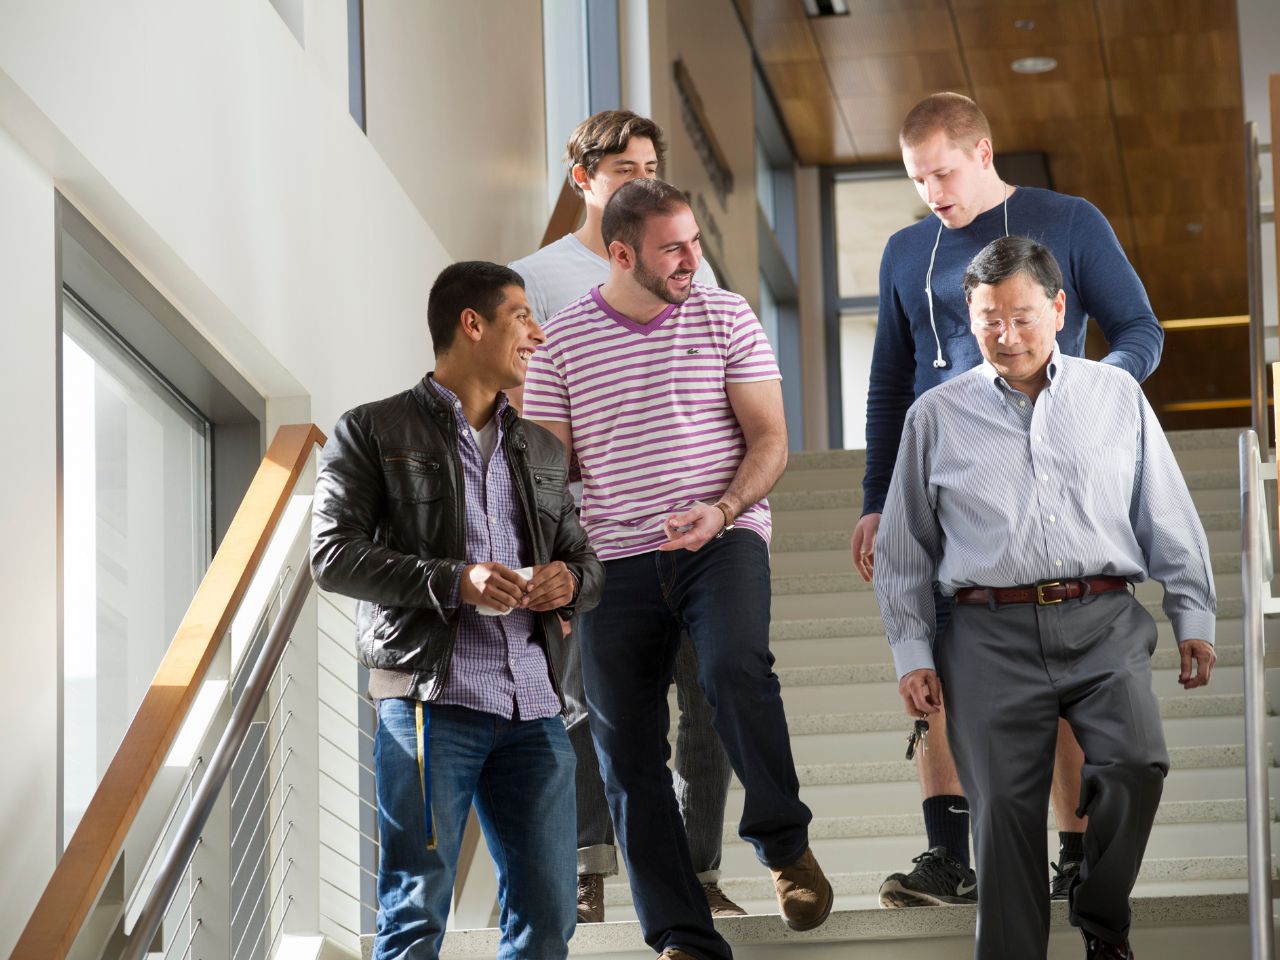 A group of four students and UC Davis School of Law Professor Clay Tanaka laugh and converse while descending the stairs in King Hall.